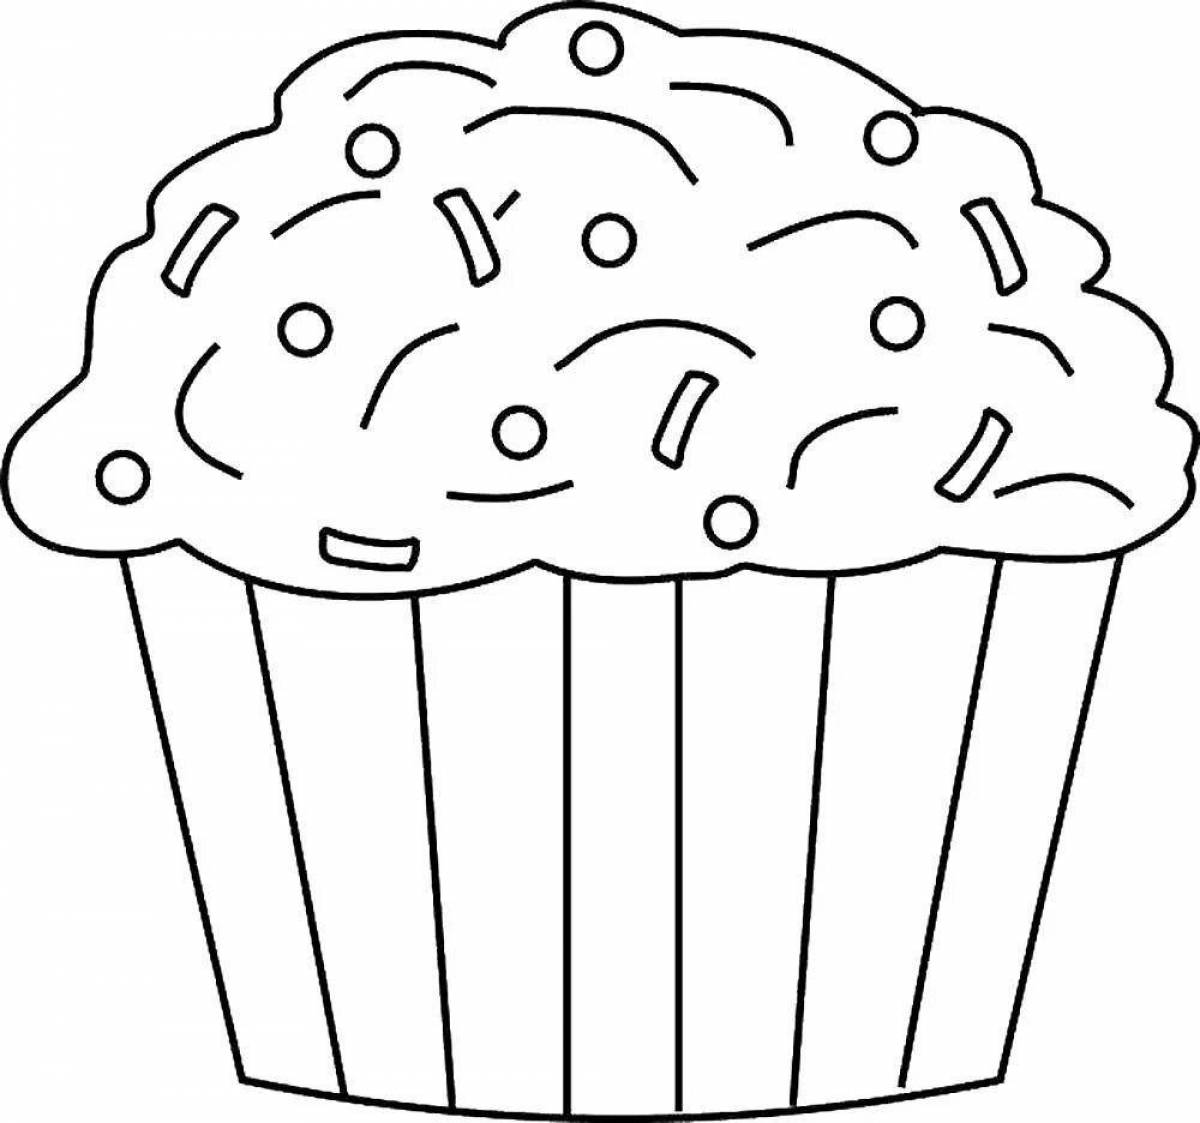 Crazy Cupcake Coloring Pages for Kids